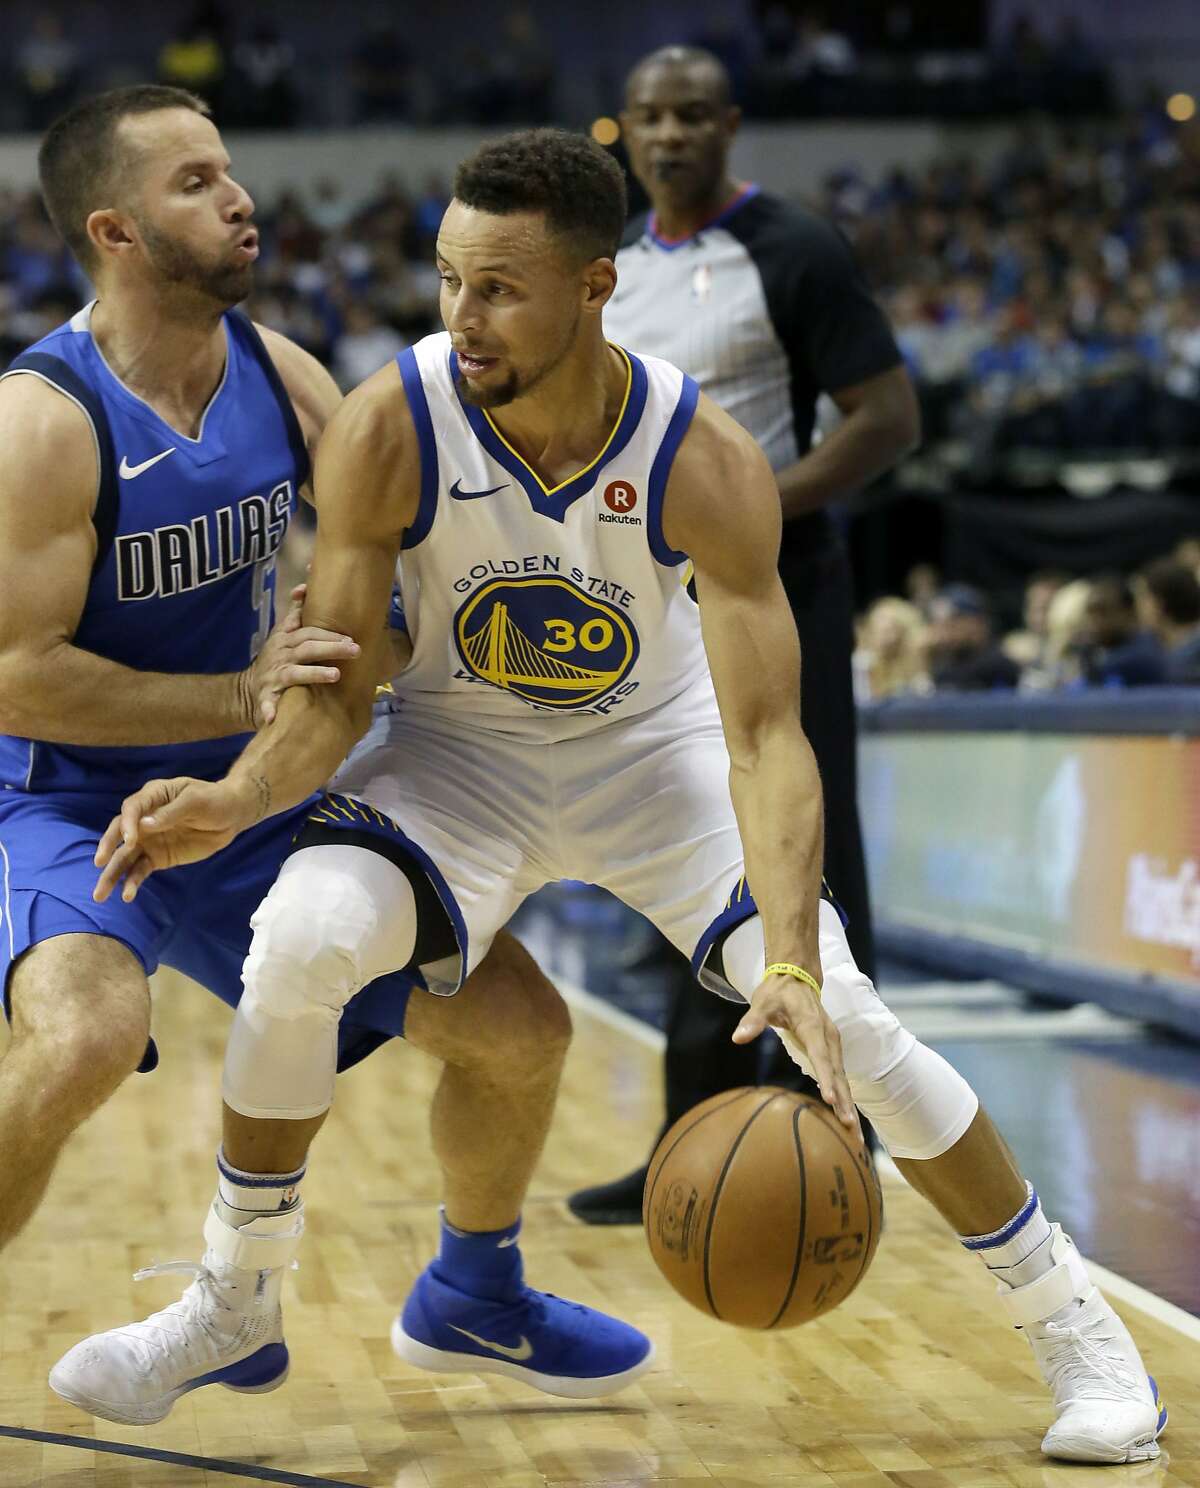 Golden State Warriors guard Stephen Curry (30) drives against Dallas Mavericks guard J.J. Barea (5) during the first half of an NBA basketball game in Dallas, Monday, Oct. 23, 2017.